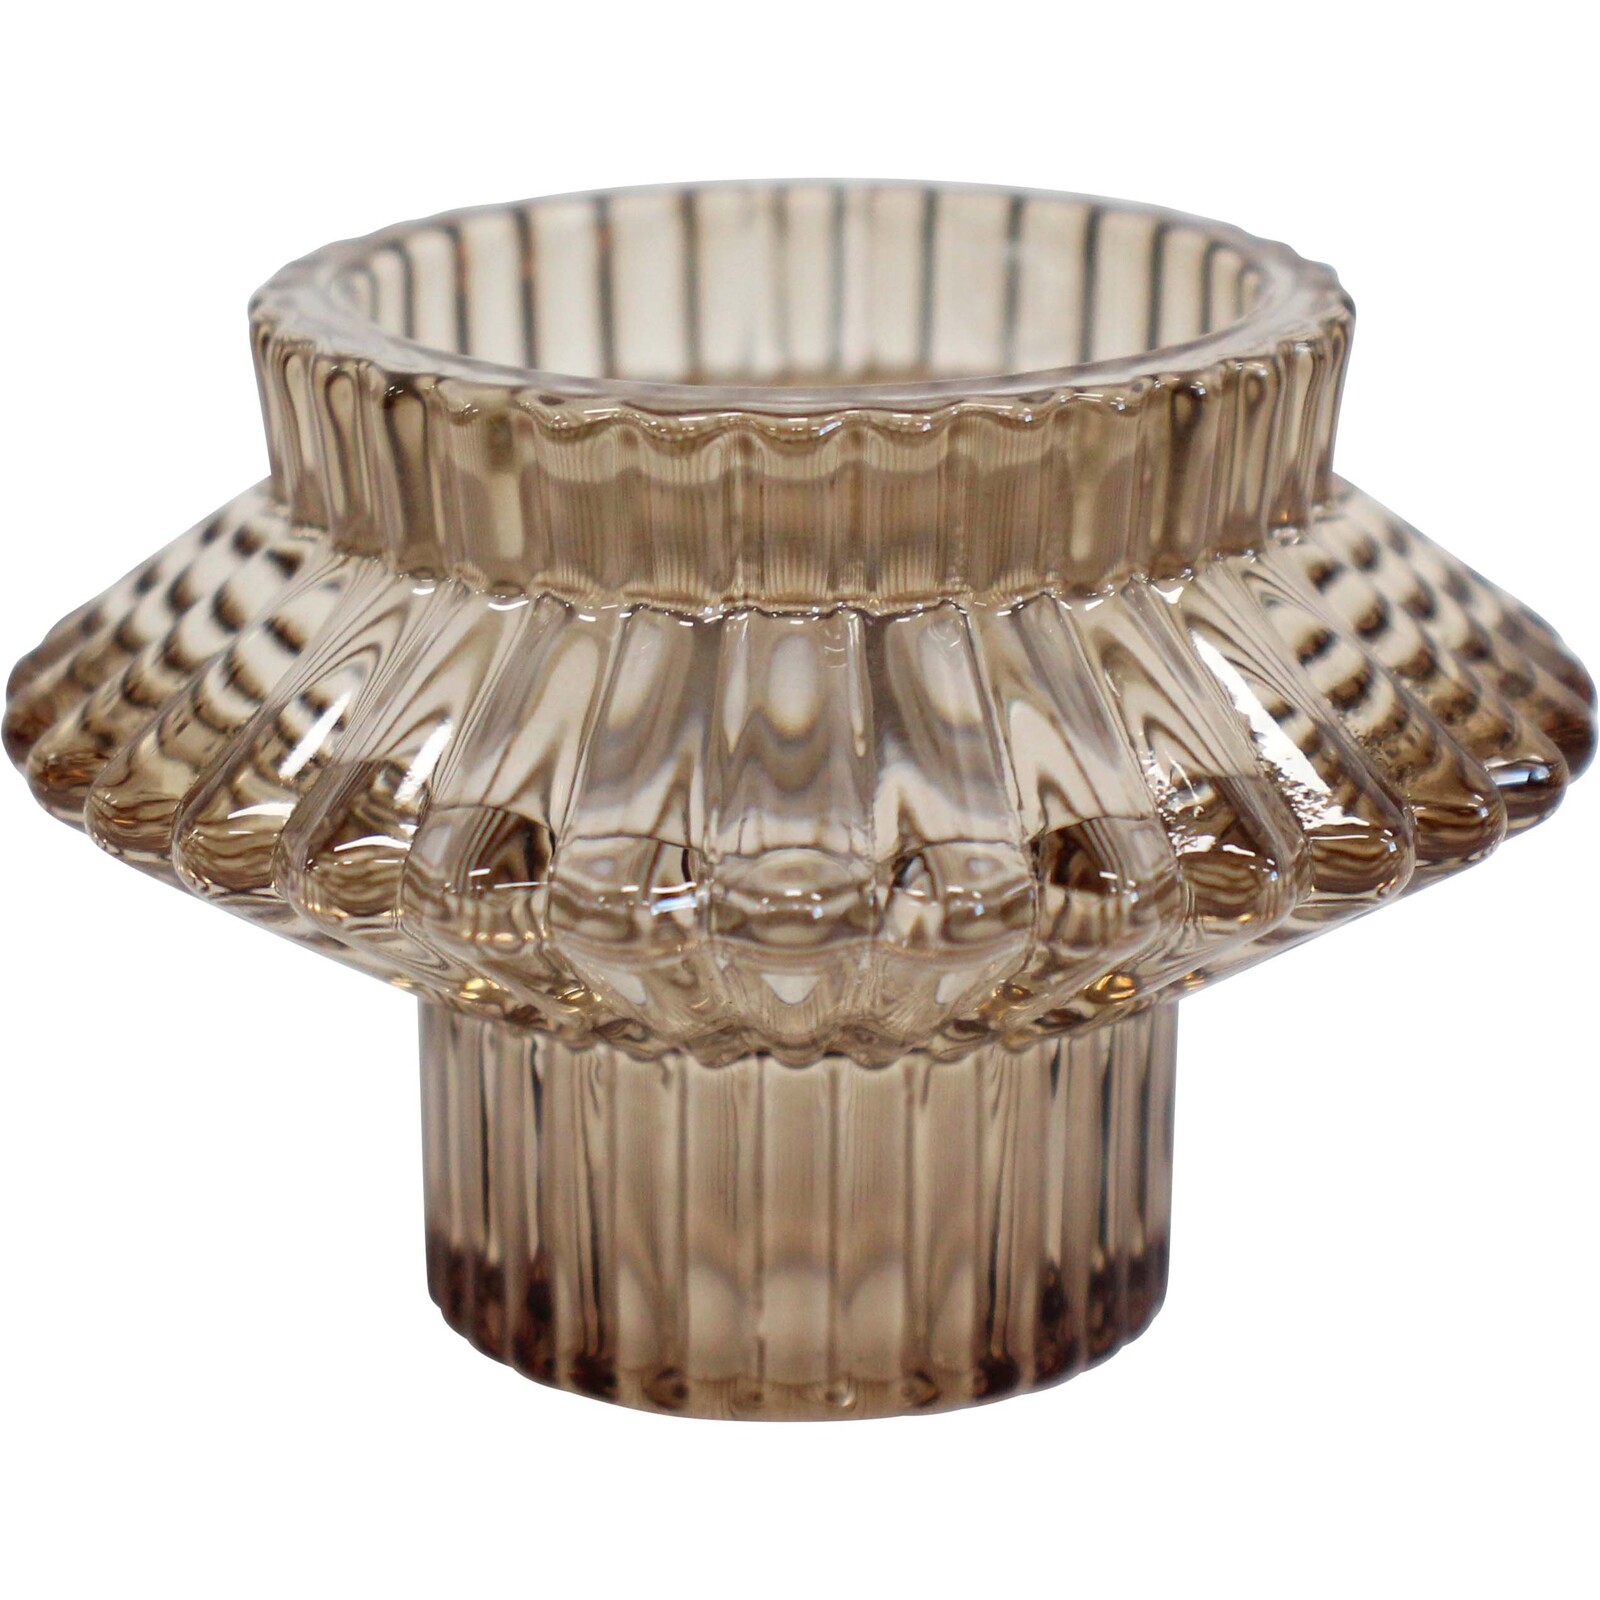 Double Sided Candle Holder Morroco